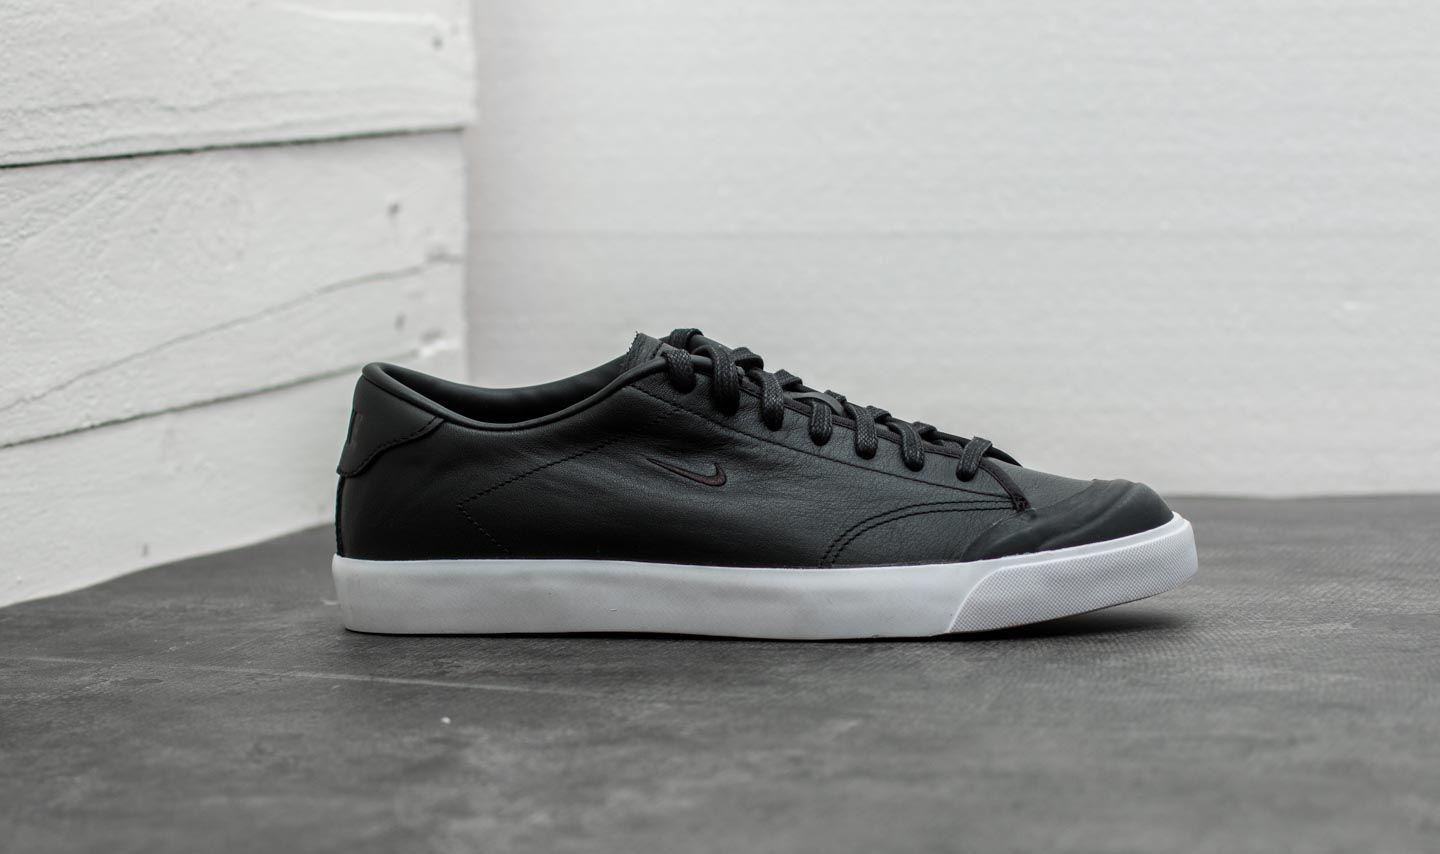 nike all court 2 low leather white